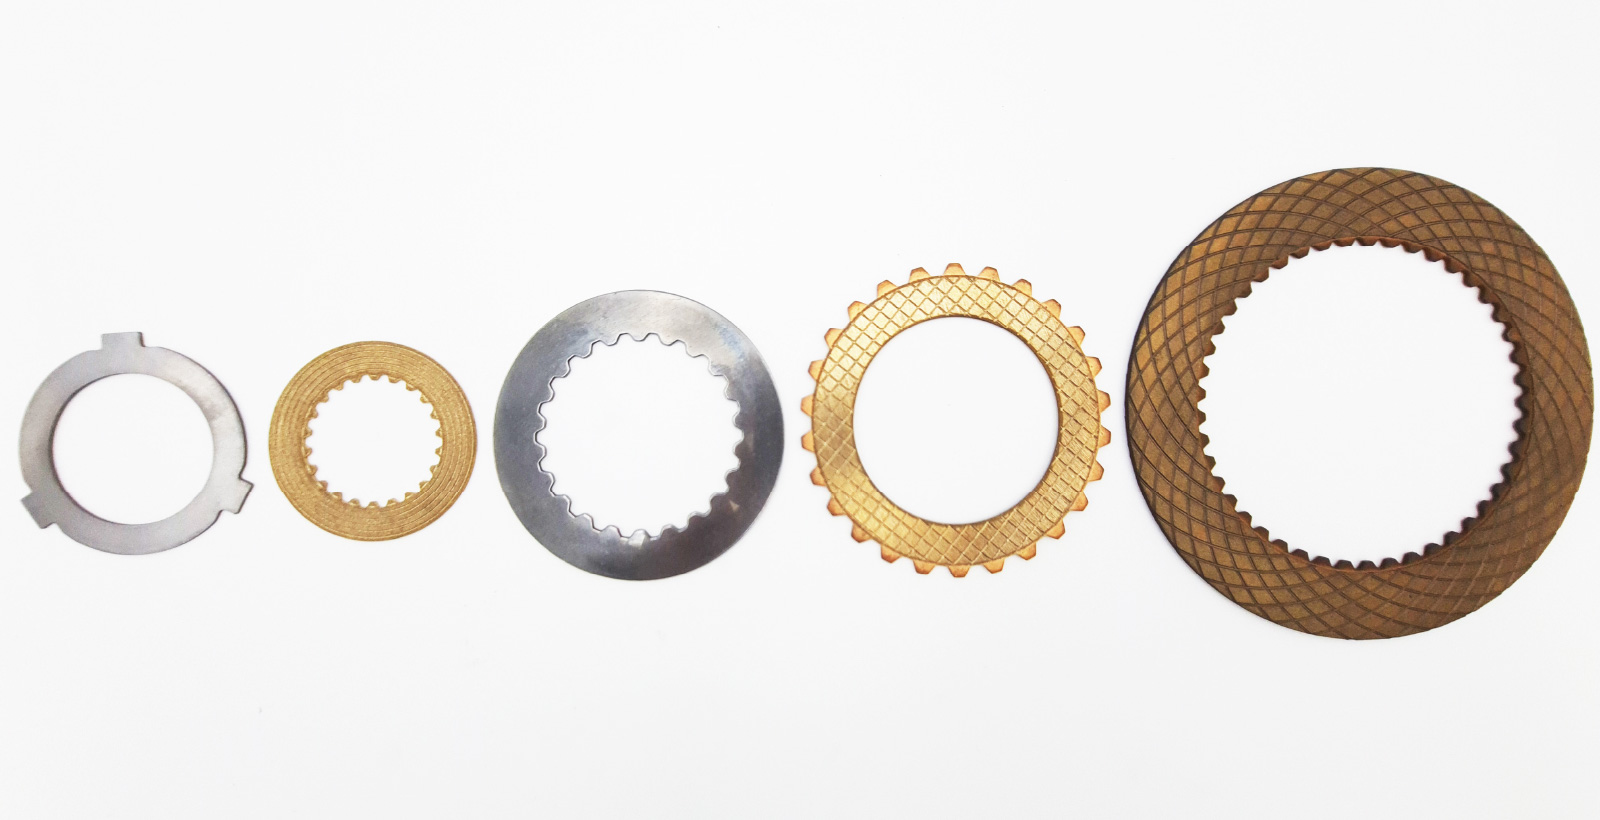 Iron Transmission Discs for Paper and Pulp Industry